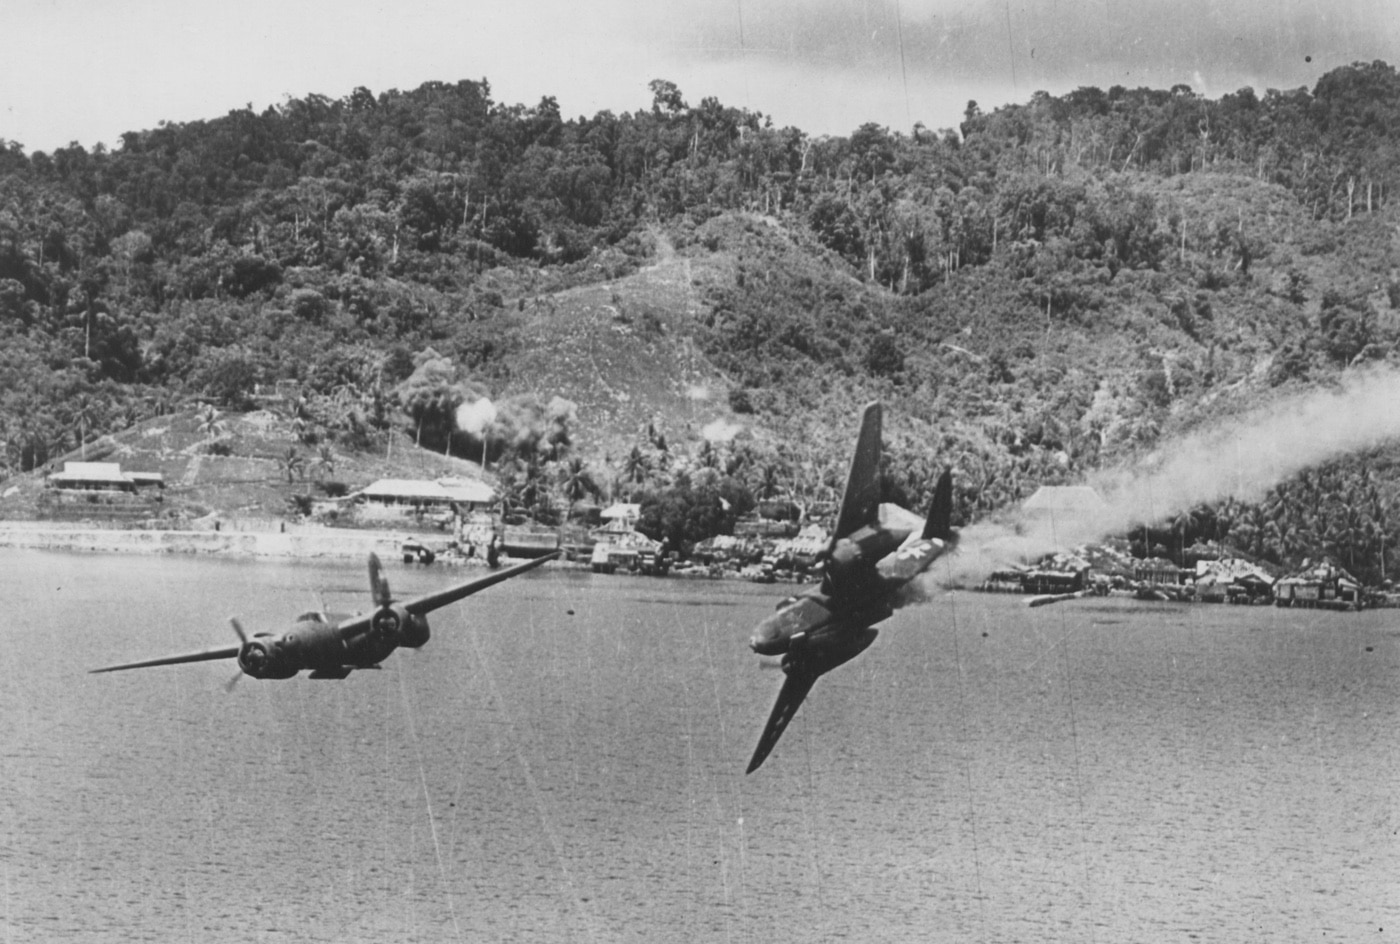 In this image, we see a Douglas A-20 Havoc caught by Japanese anti-aircraft flak, swerves out of control, and crashes into the ocean. All men were killed.